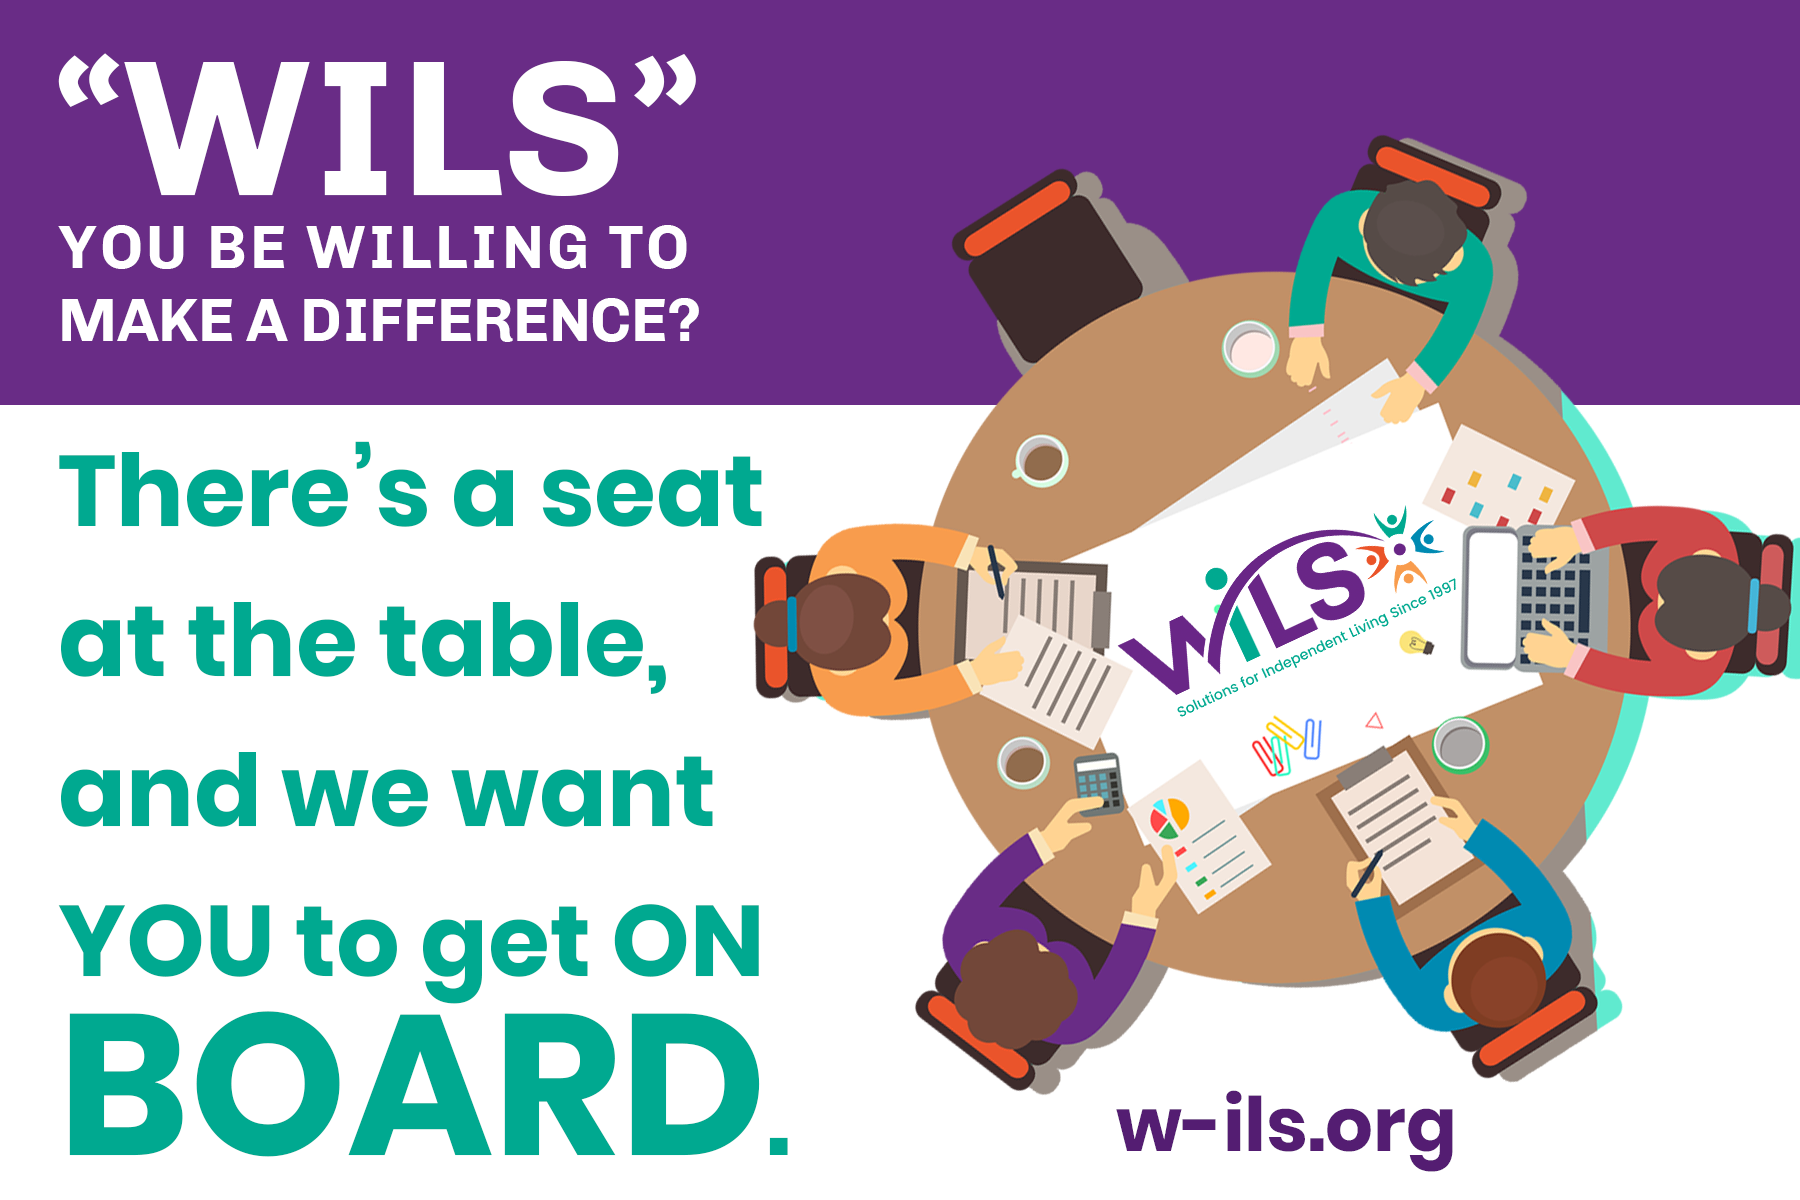 "WILS" you be willing to make a difference?  There's a seat and the table, and we want you to get on board.